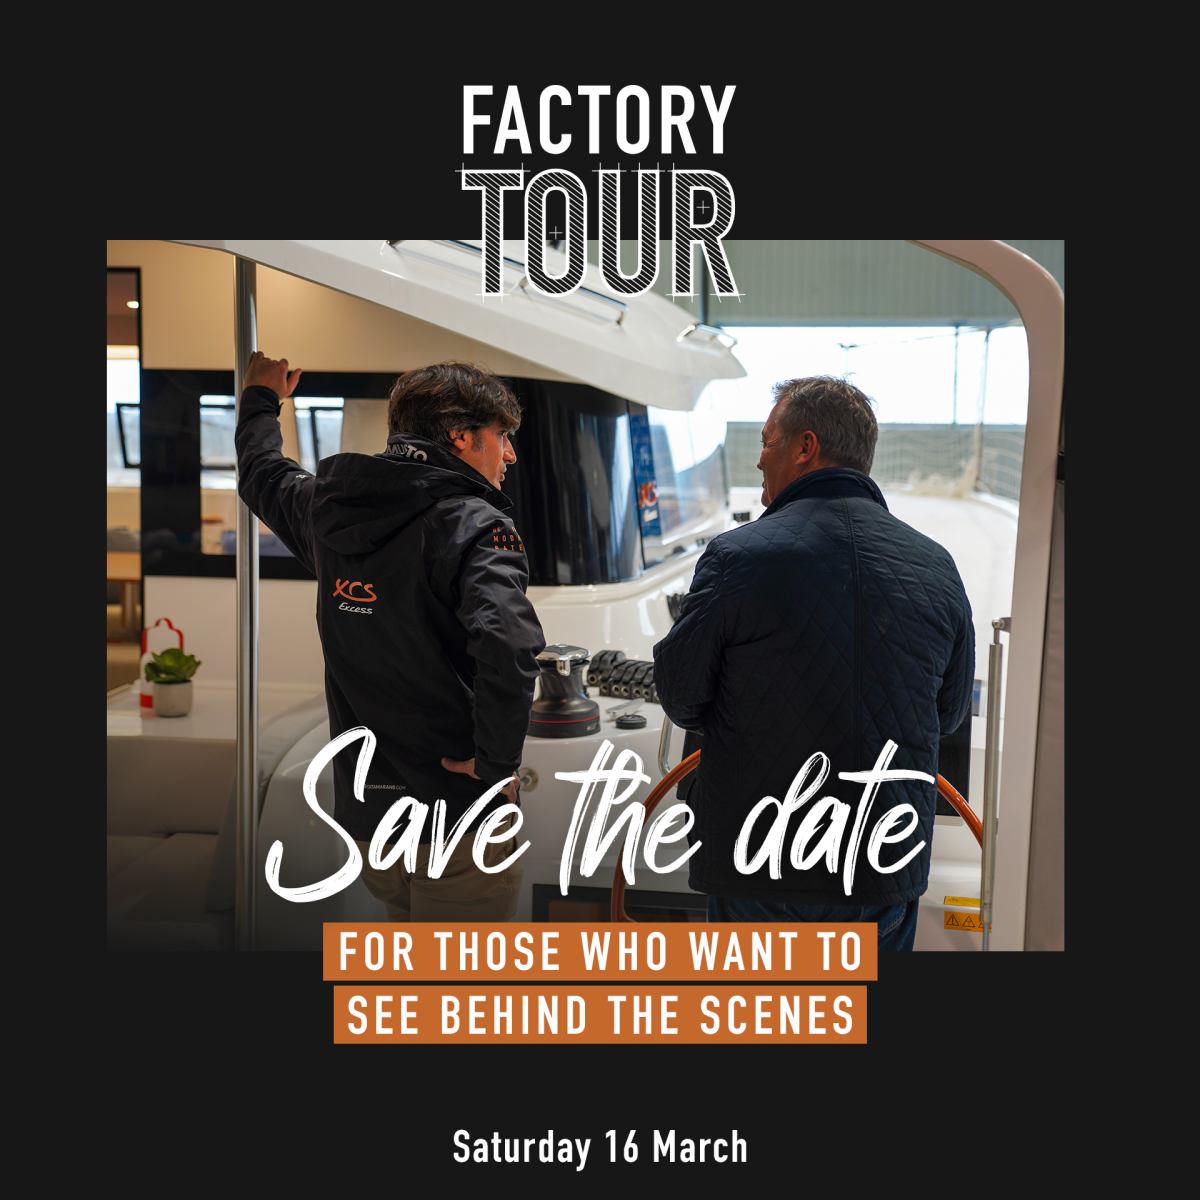 Save The Date, Excess Factory Tour